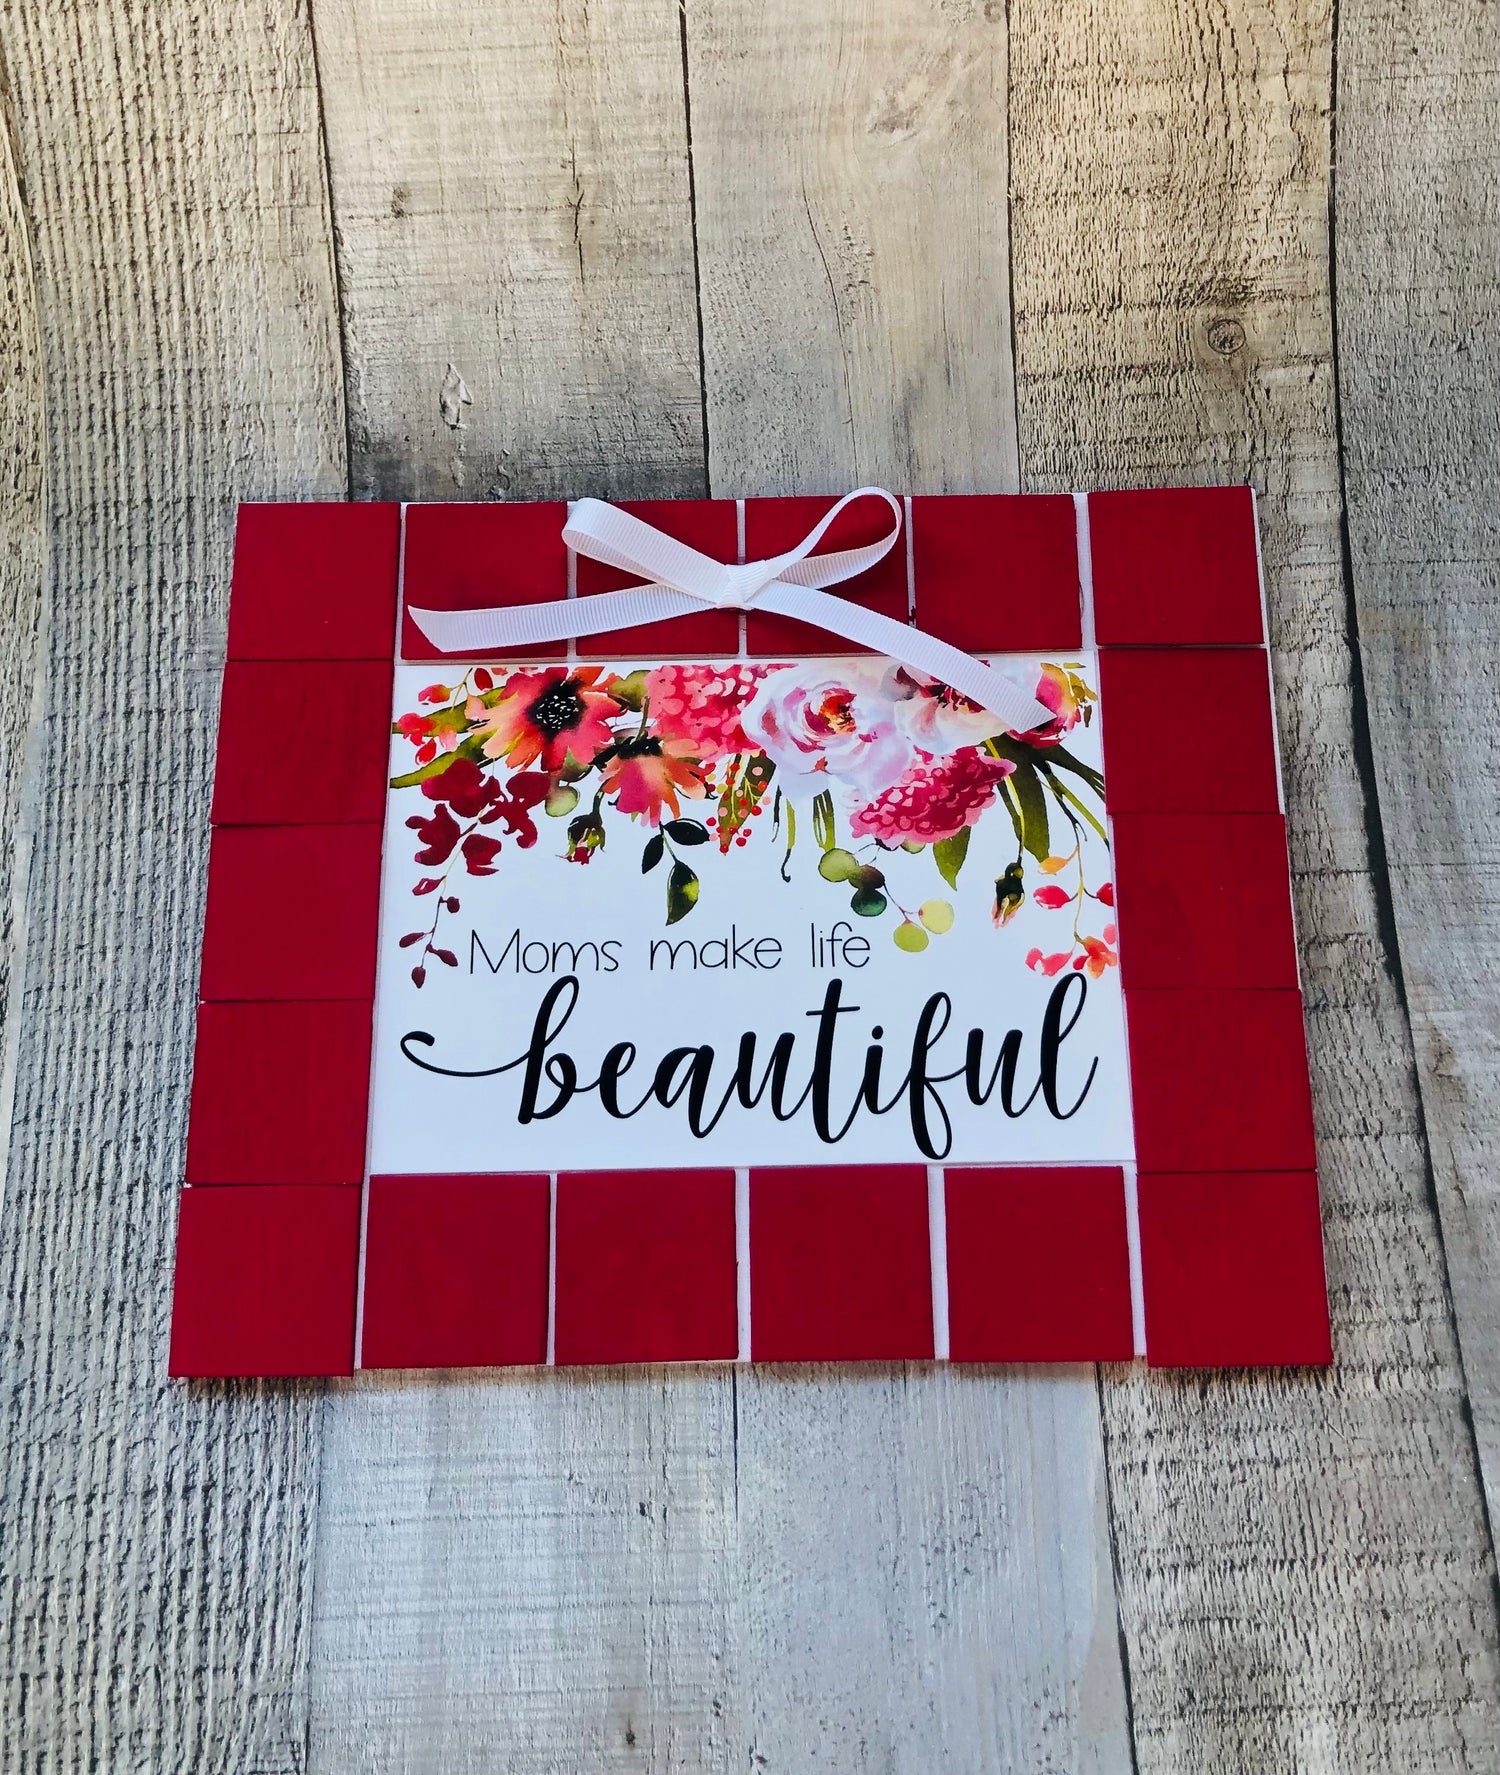 This is a completed Mother's Day craft kit from Seniorly Creations. It says Moms make life beautiful. 